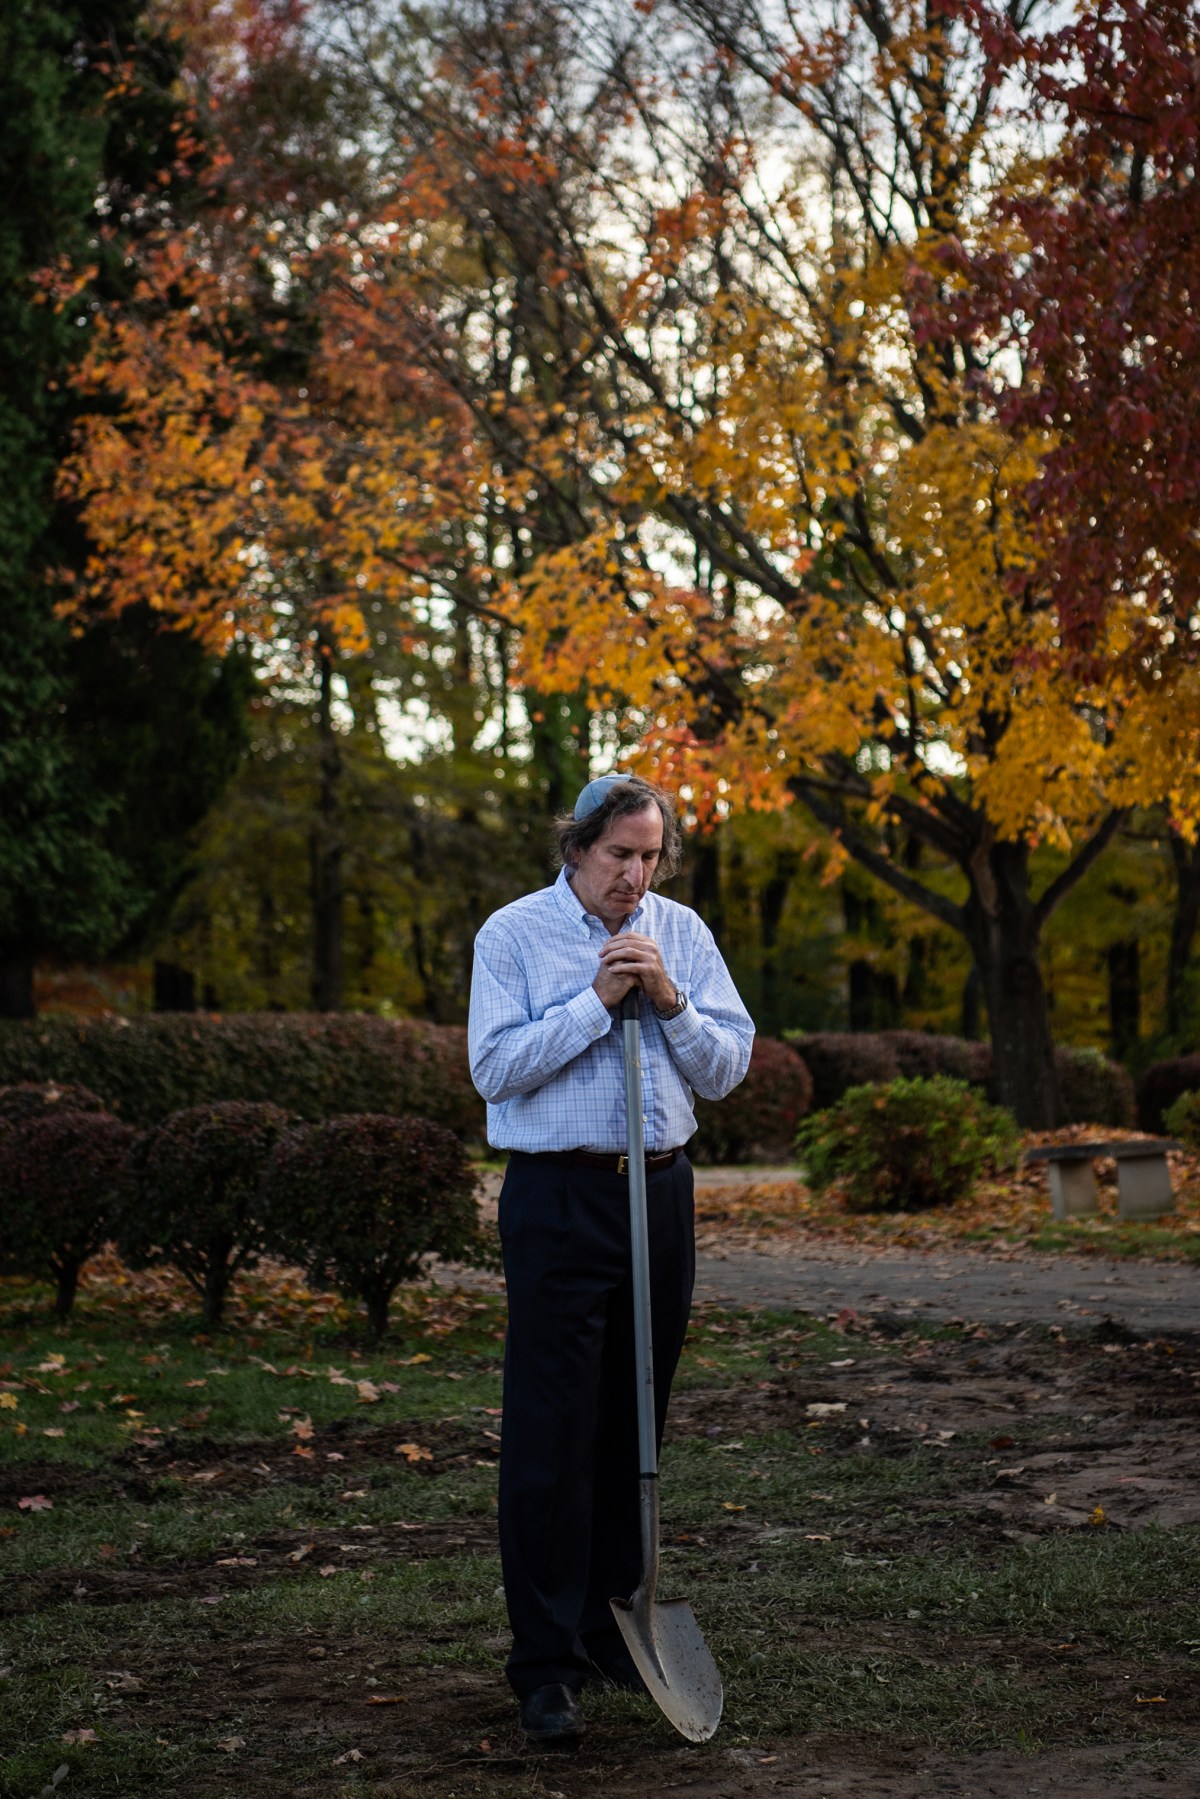 Gene Tabachnick, a friend of the slain brothers David and Cecil Rosenthal, stands near their graves during a burial ceremony in Pittsburgh